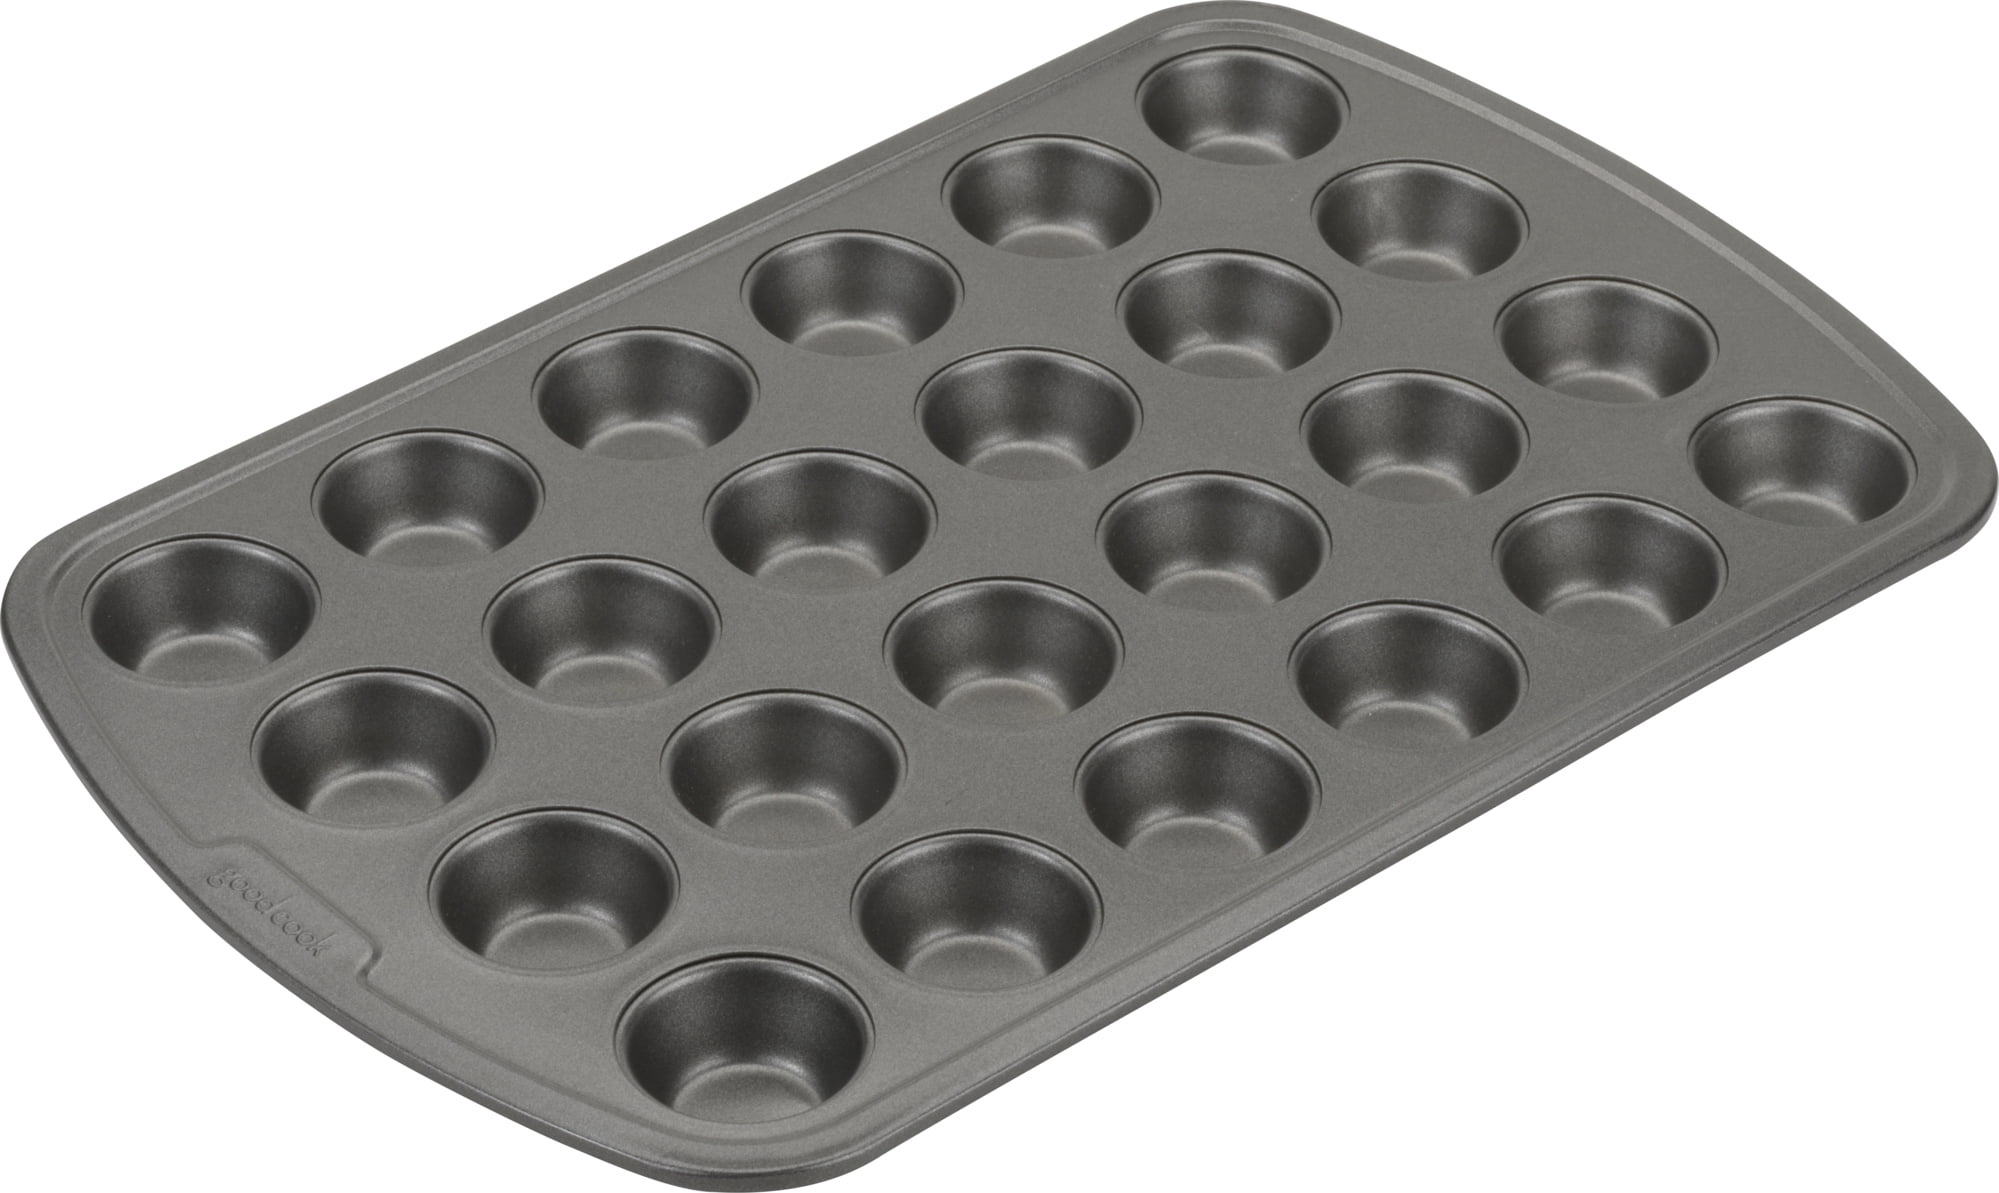 JXWING 6 Cups Non-stick Silicone Cupcake Baking Pan with Ergonomics Grips,  Premium Stainless Steel Core Muffin Pan, Green